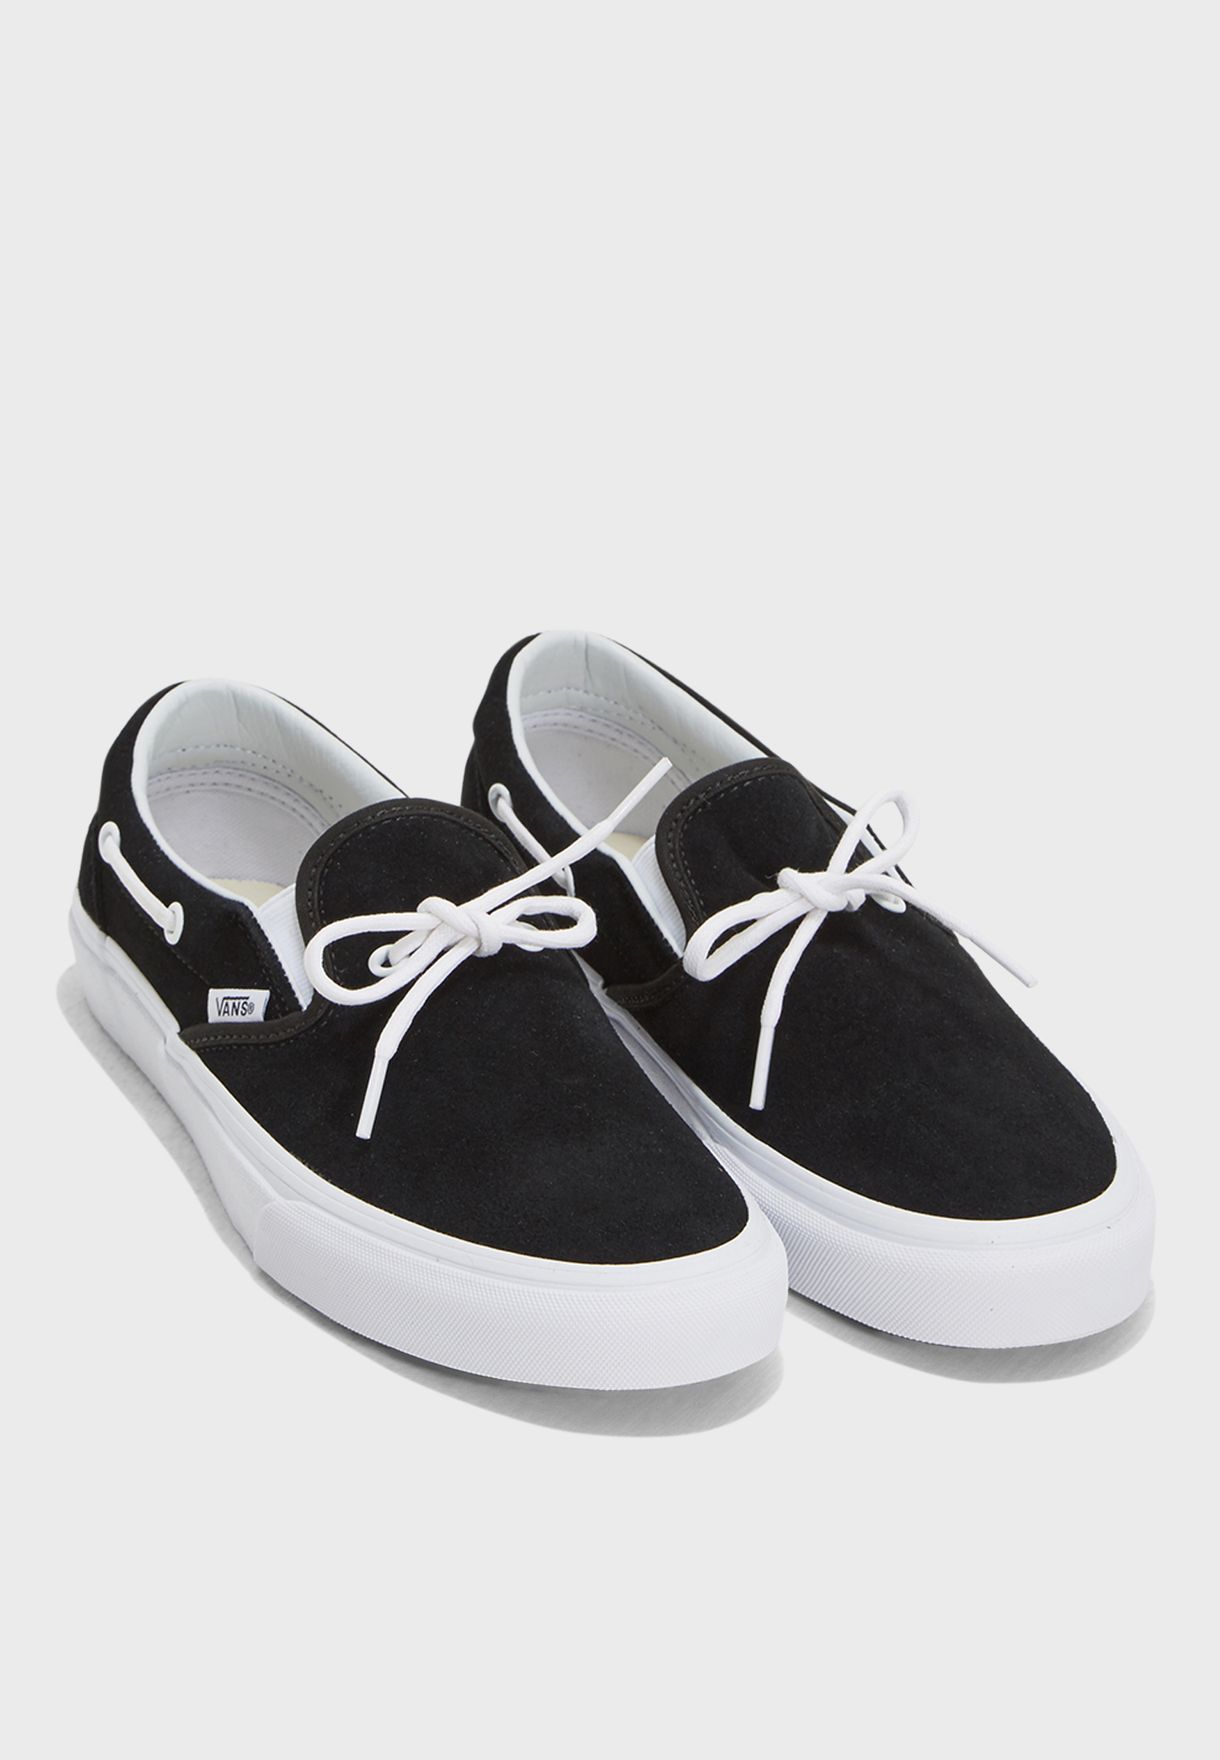 vans lacey price - 53% remise - www 